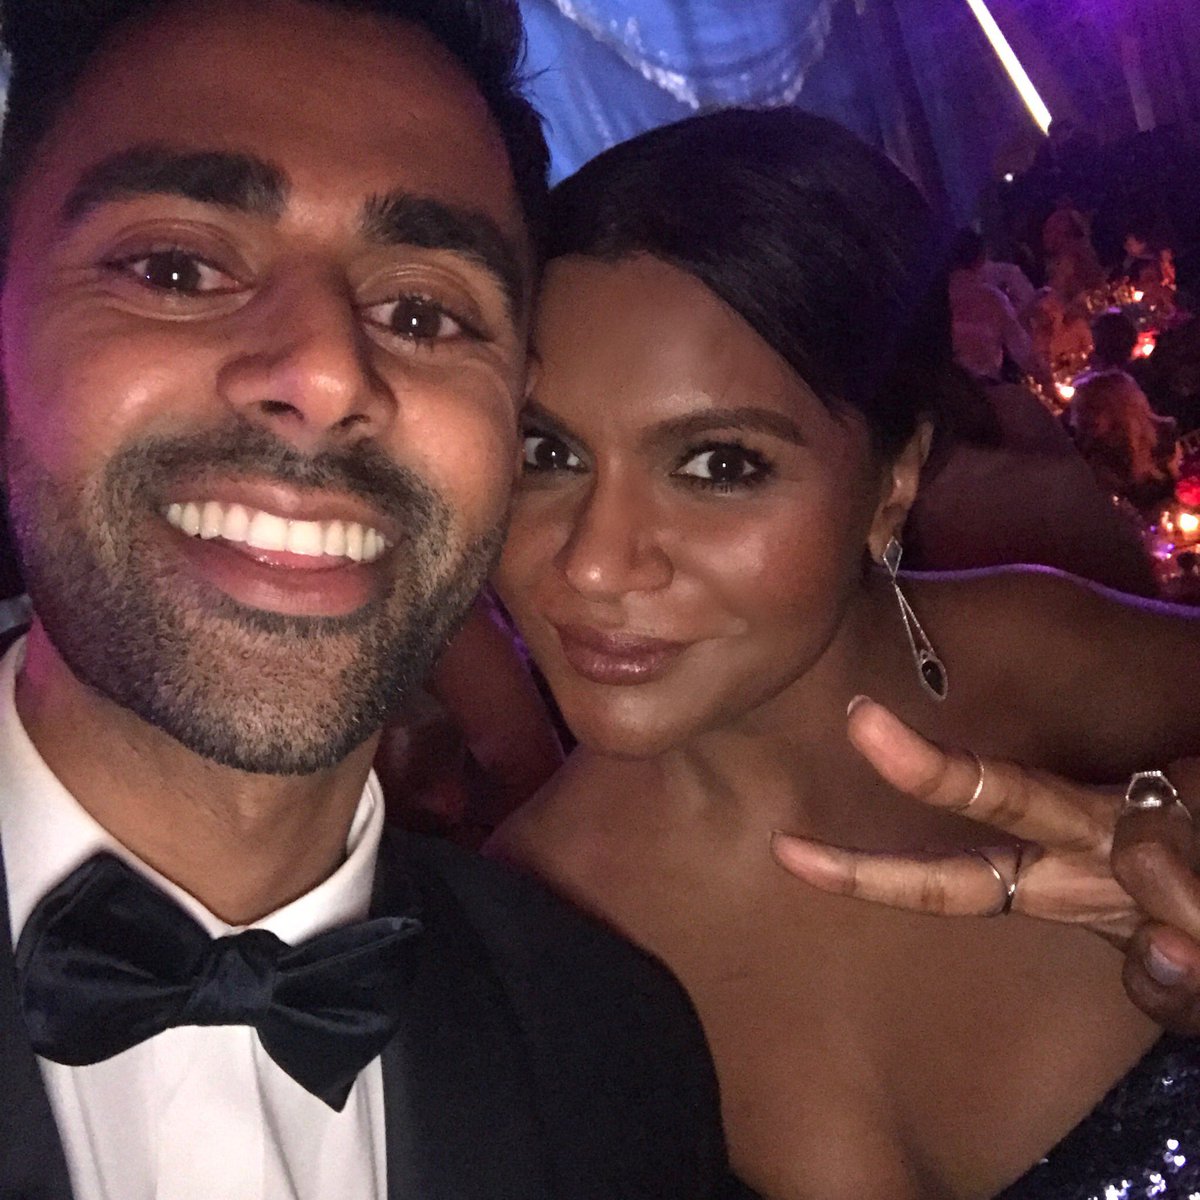 Completely illegal selfie of me with my talented little cousin @hasanminhaj at the #metgala https://t.co/6uq4bpMnPY